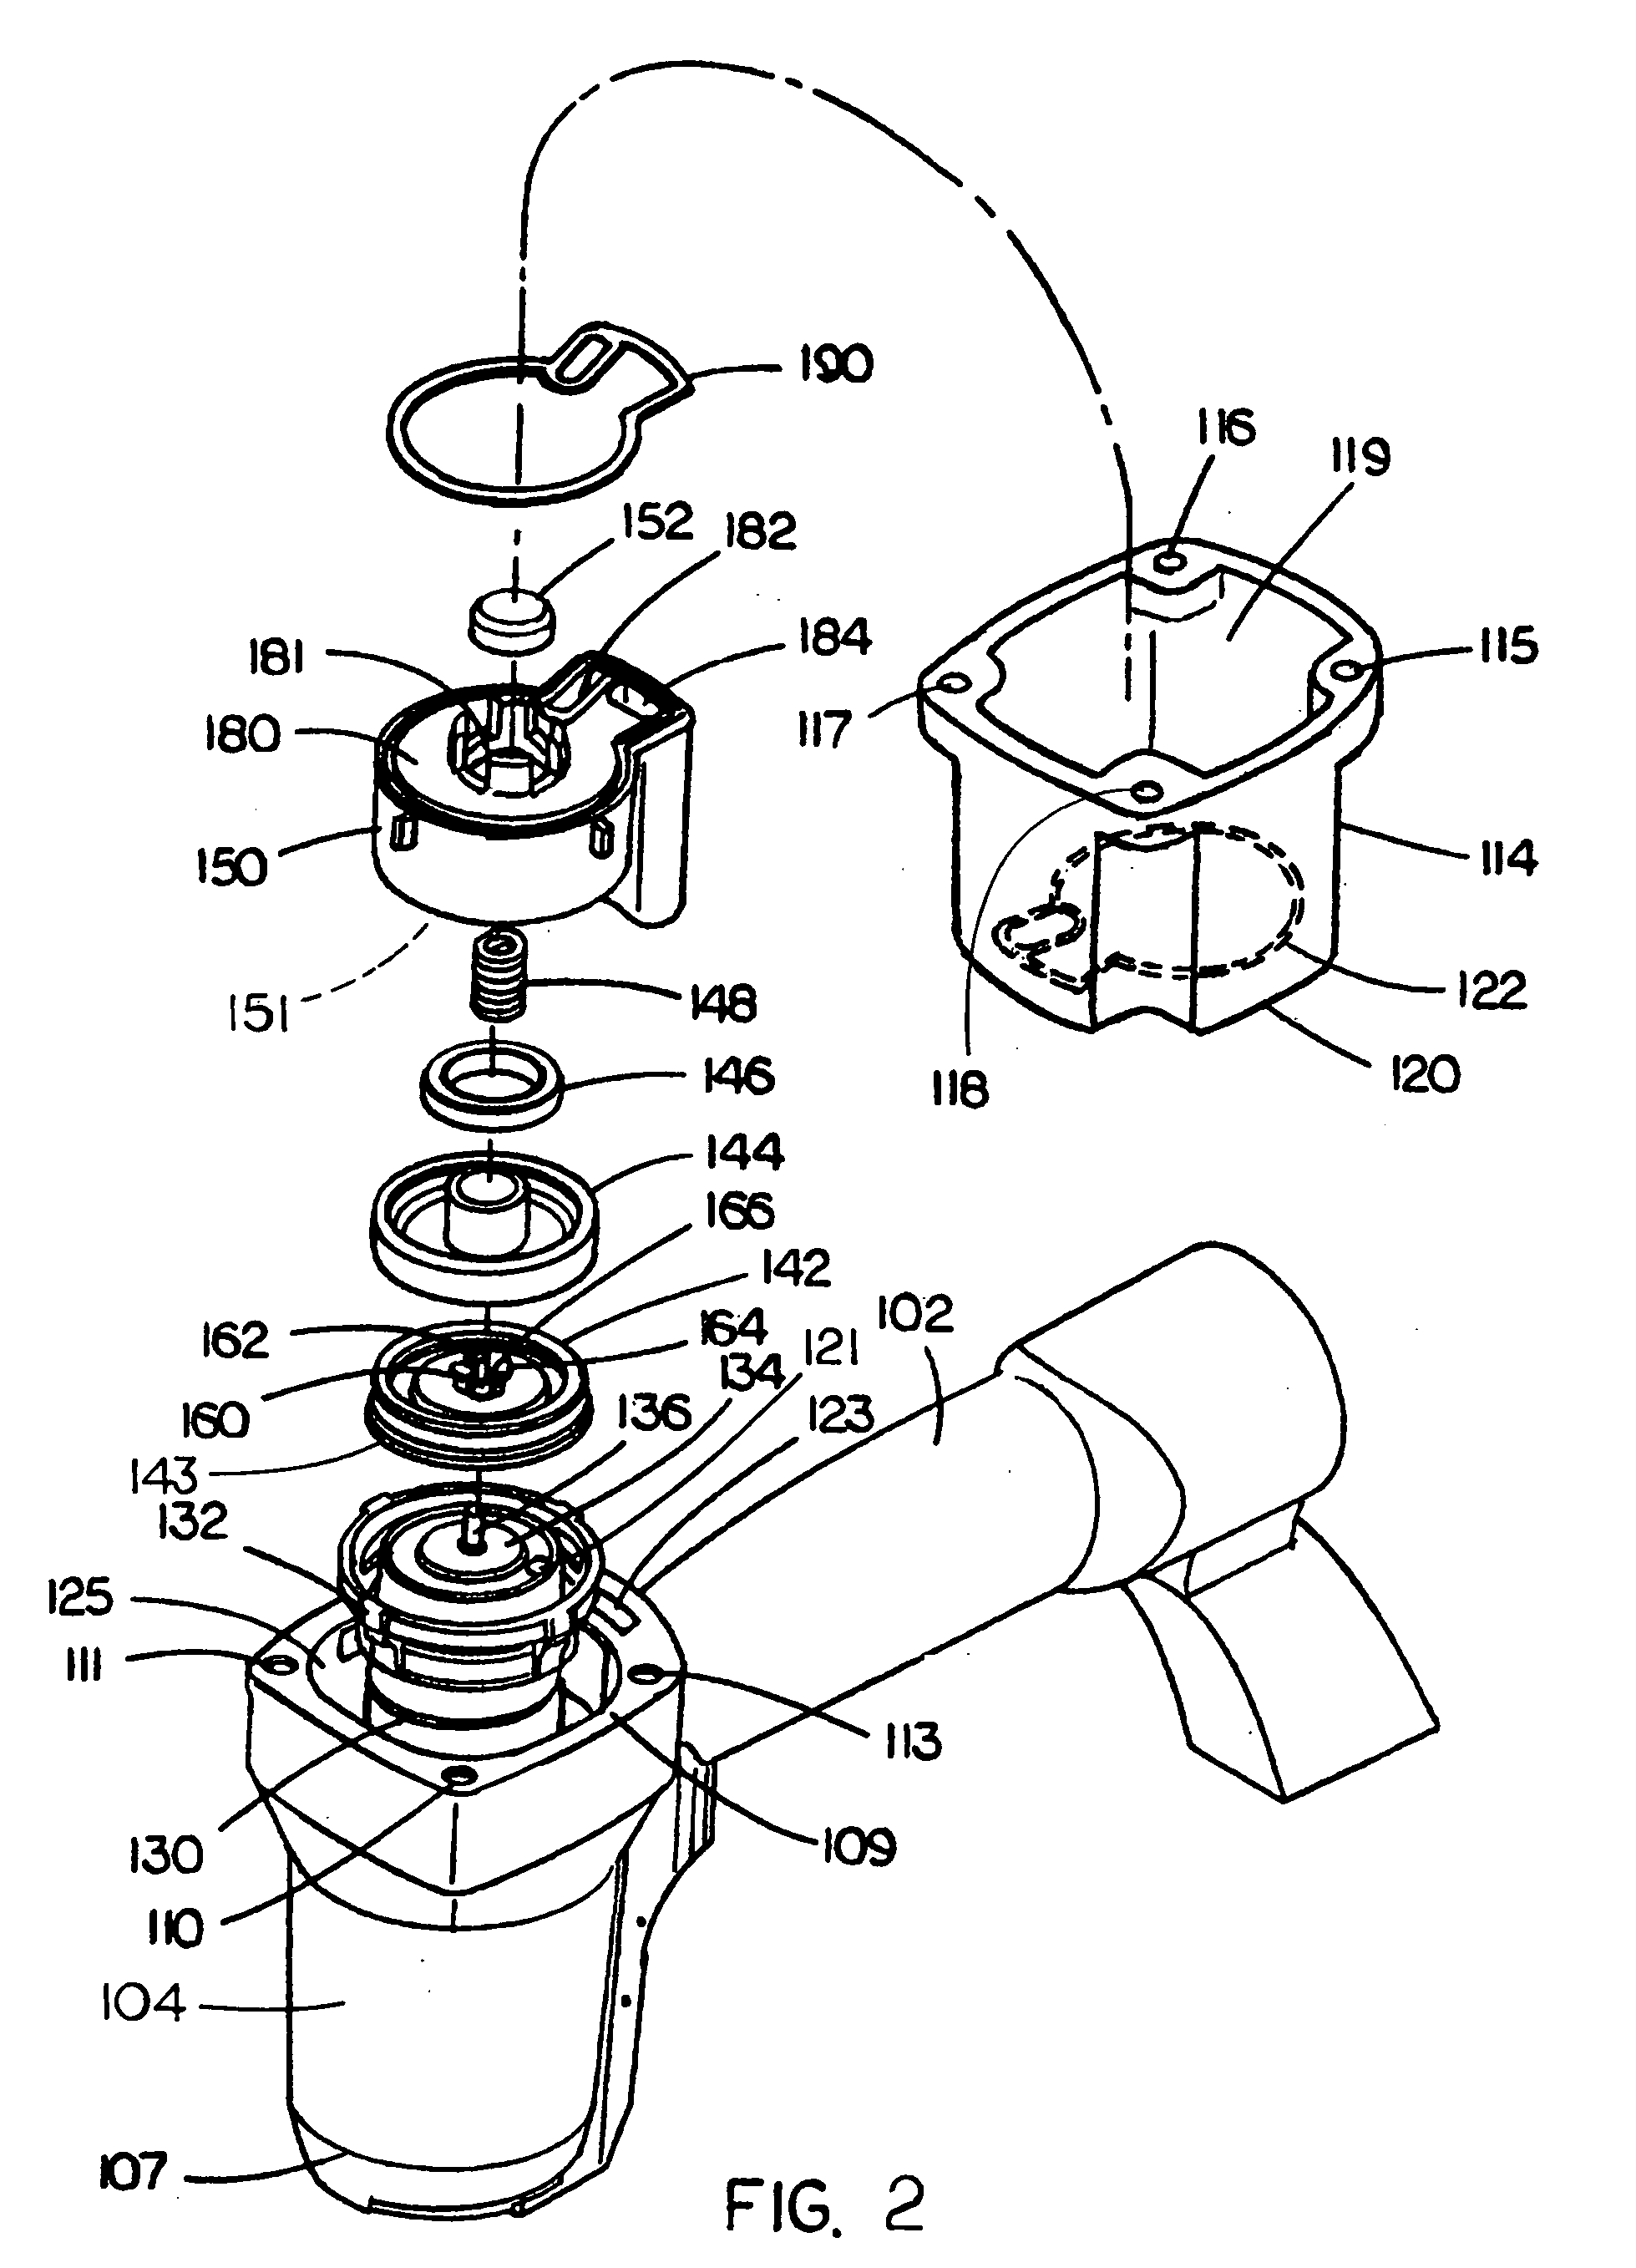 Adjustable exhaust assembly for pneumatic fasteners